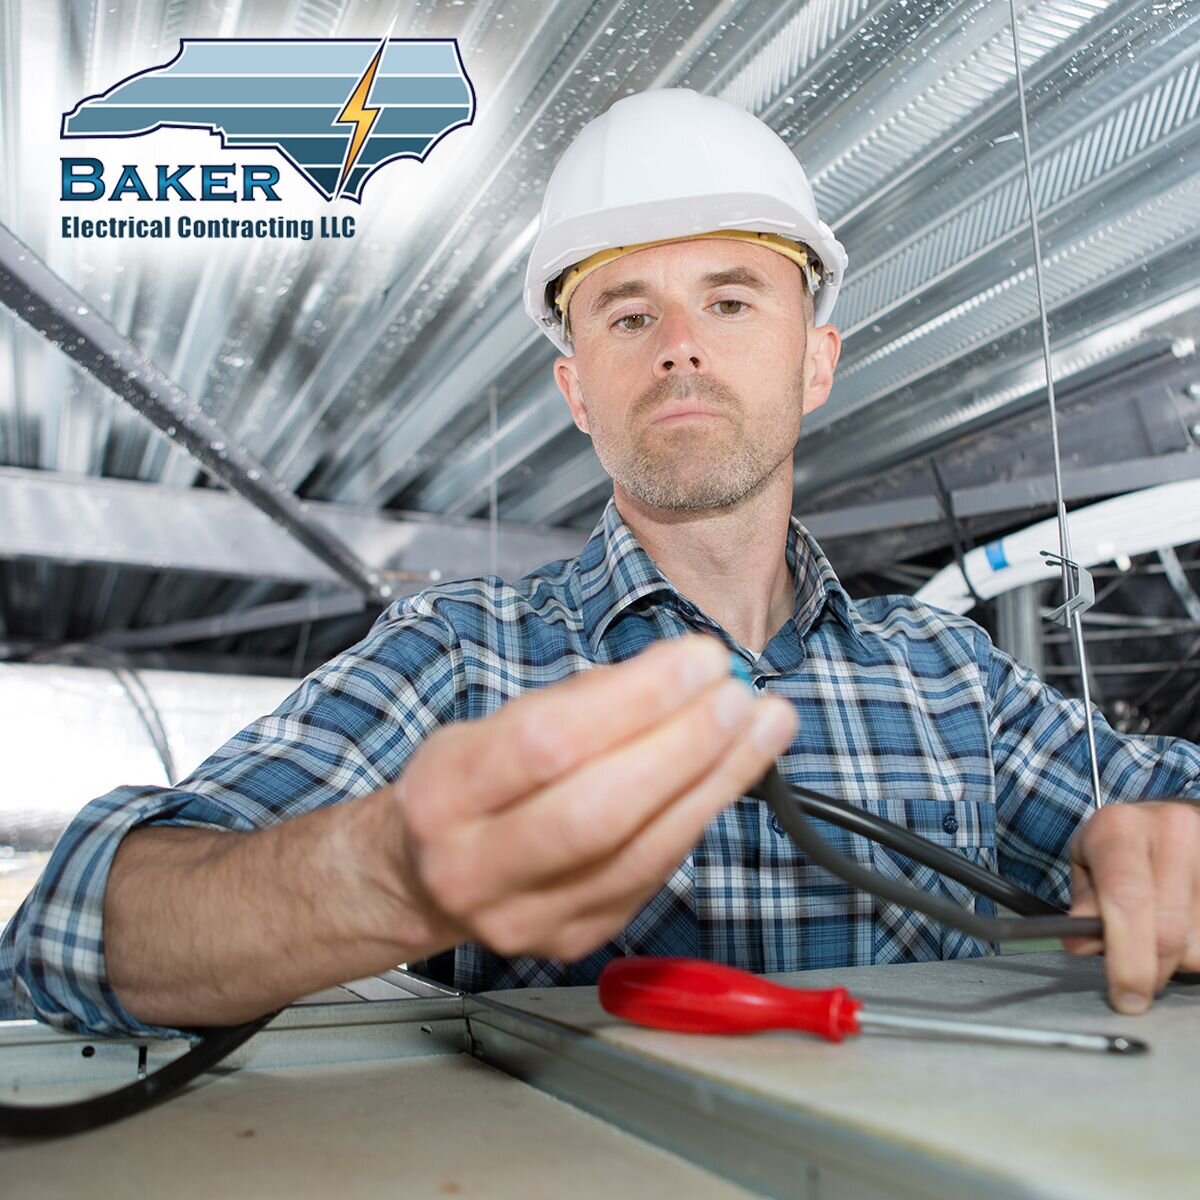 Wake Forest Electrician — Baker Electrical Contracting